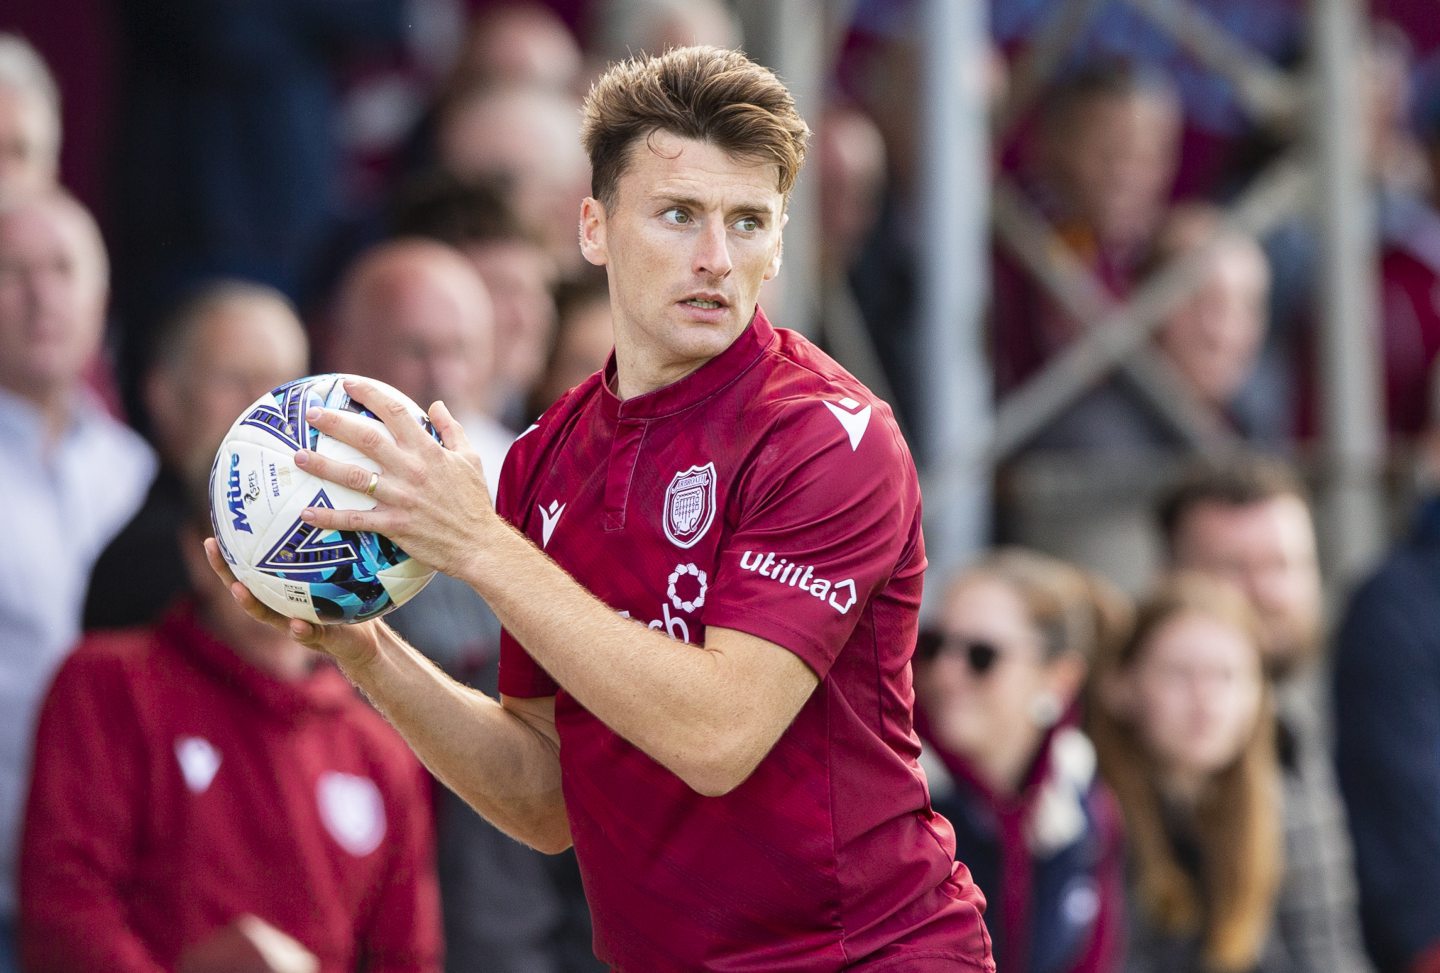 Michael McKenna could be set for a return to the Arbroath team after injury. Image: SNS